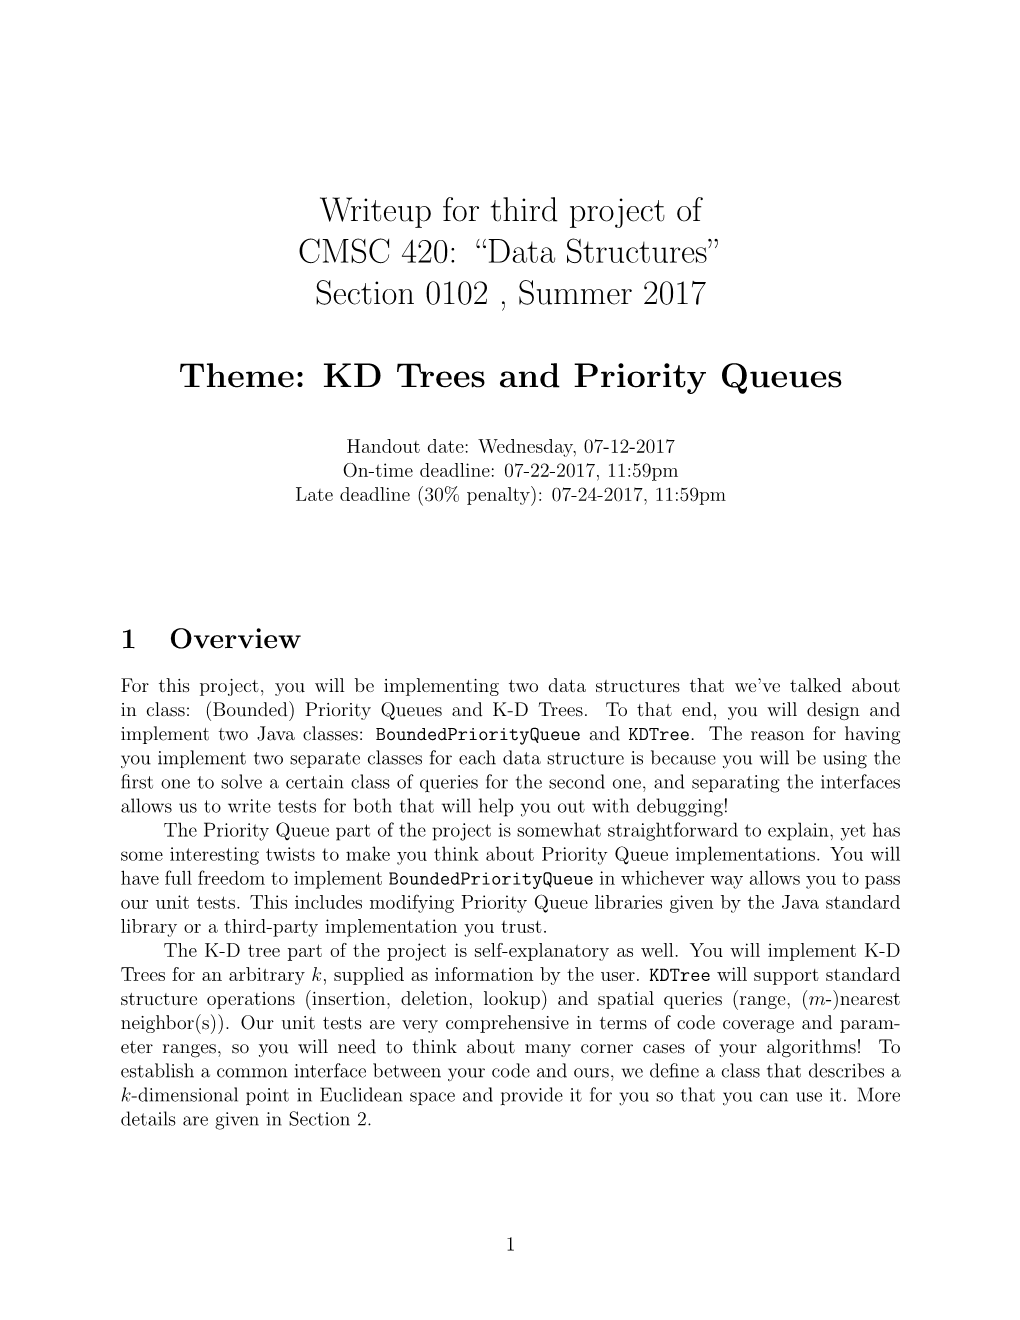 Section 0102 , Summer 2017 Theme: KD Trees and Priority Queues